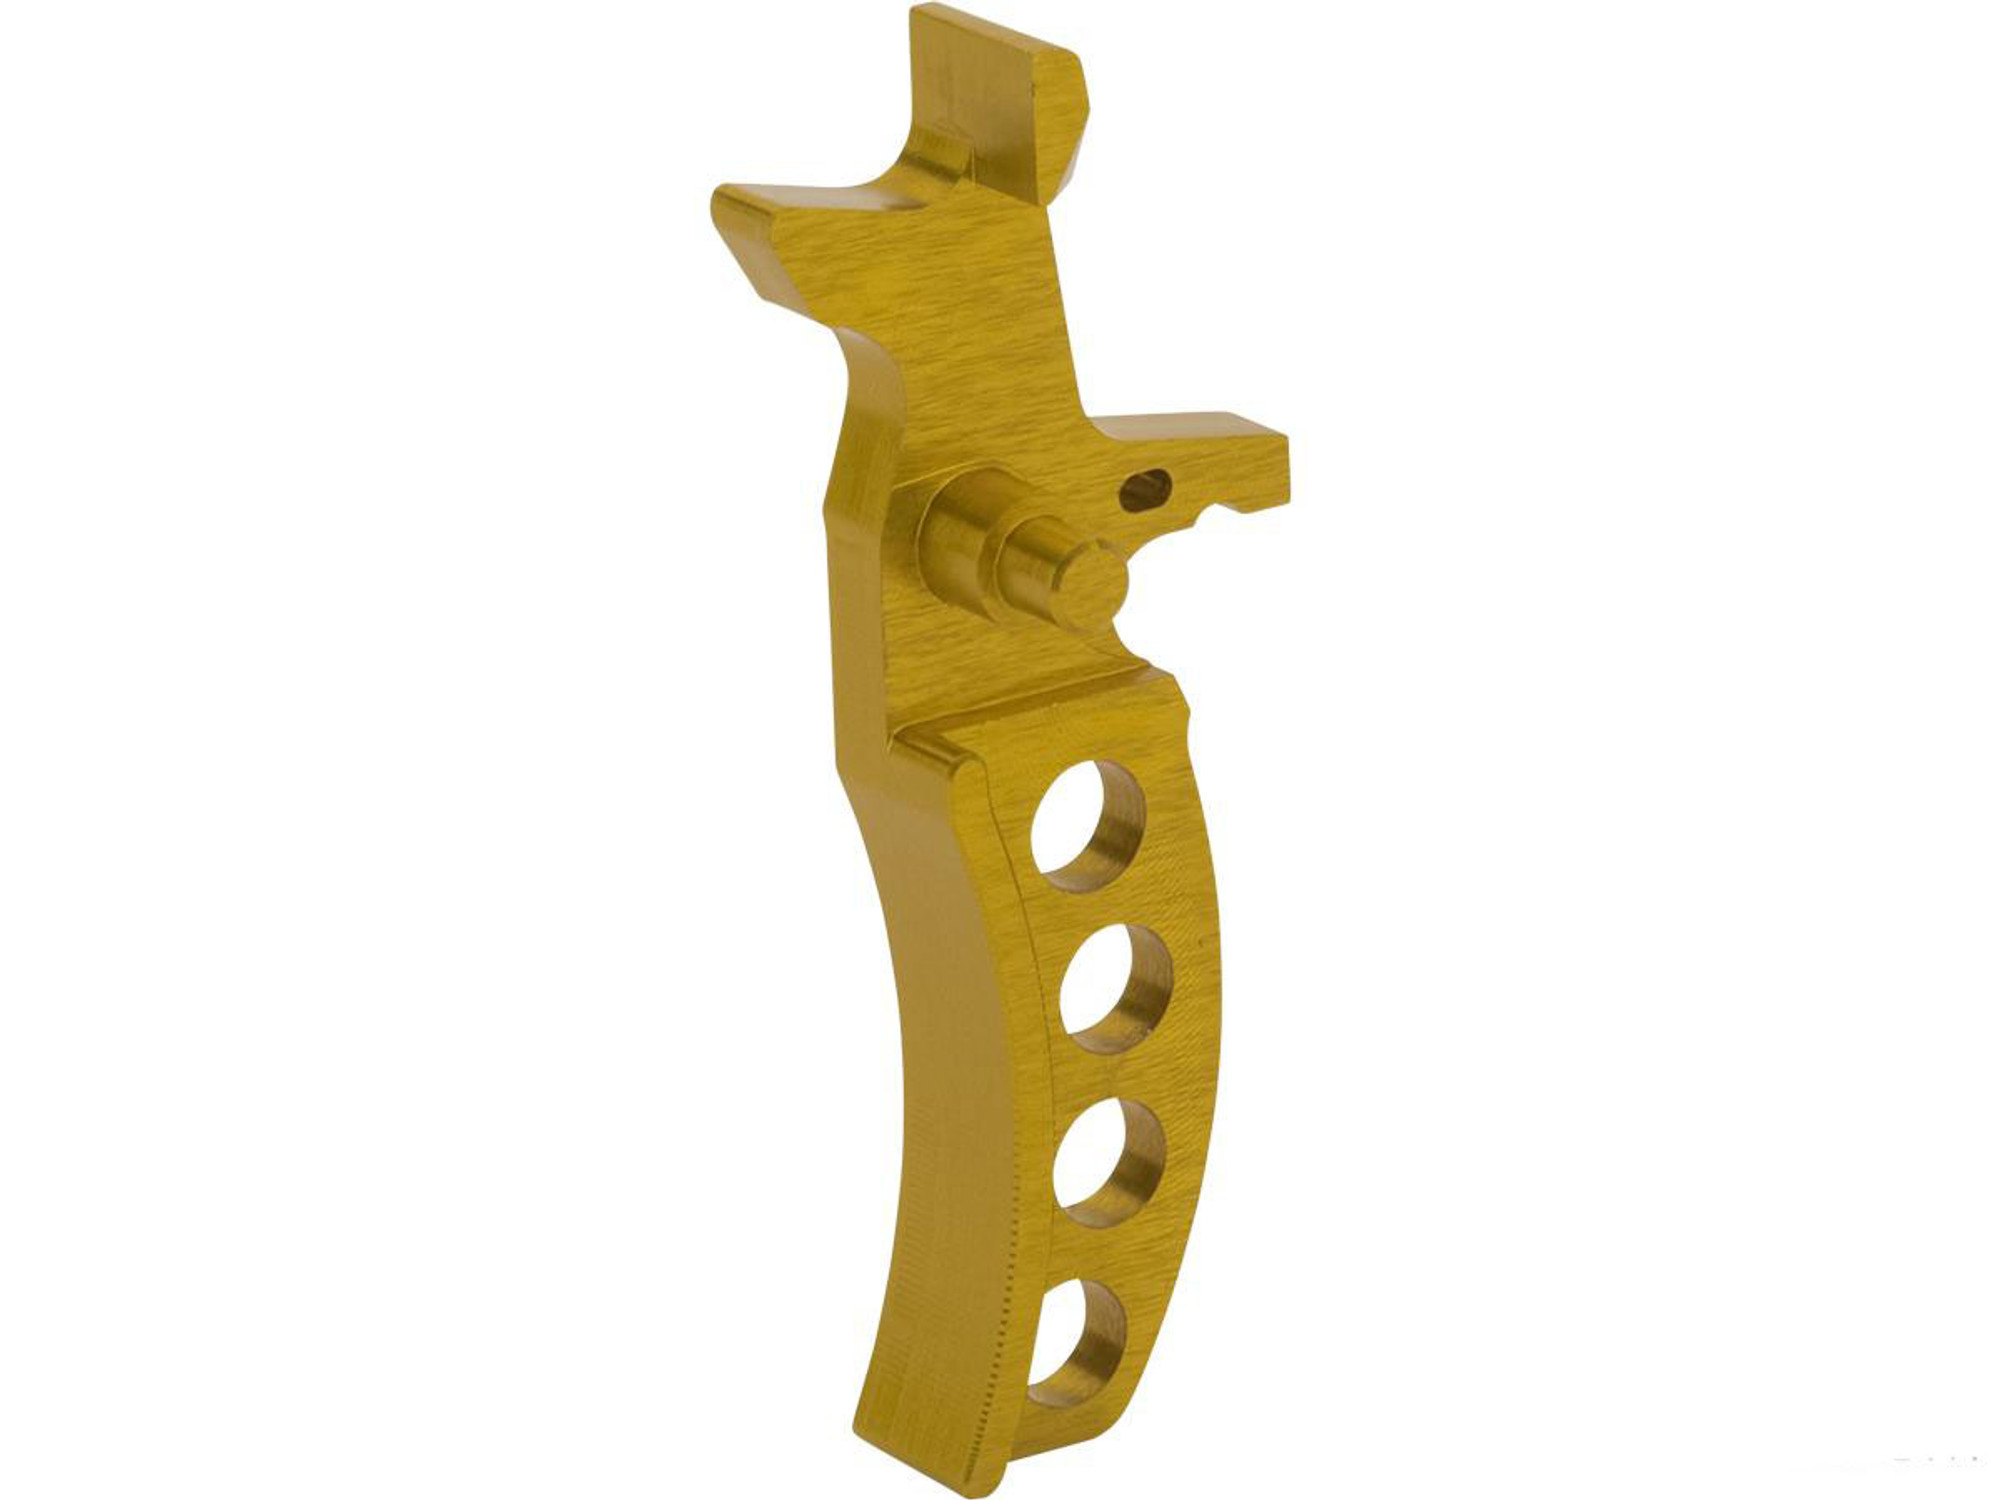 Retro Arms CNC Machined Aluminum Trigger for M4 / M16 Series AEG Rifles (Color: Yellow / Style D)